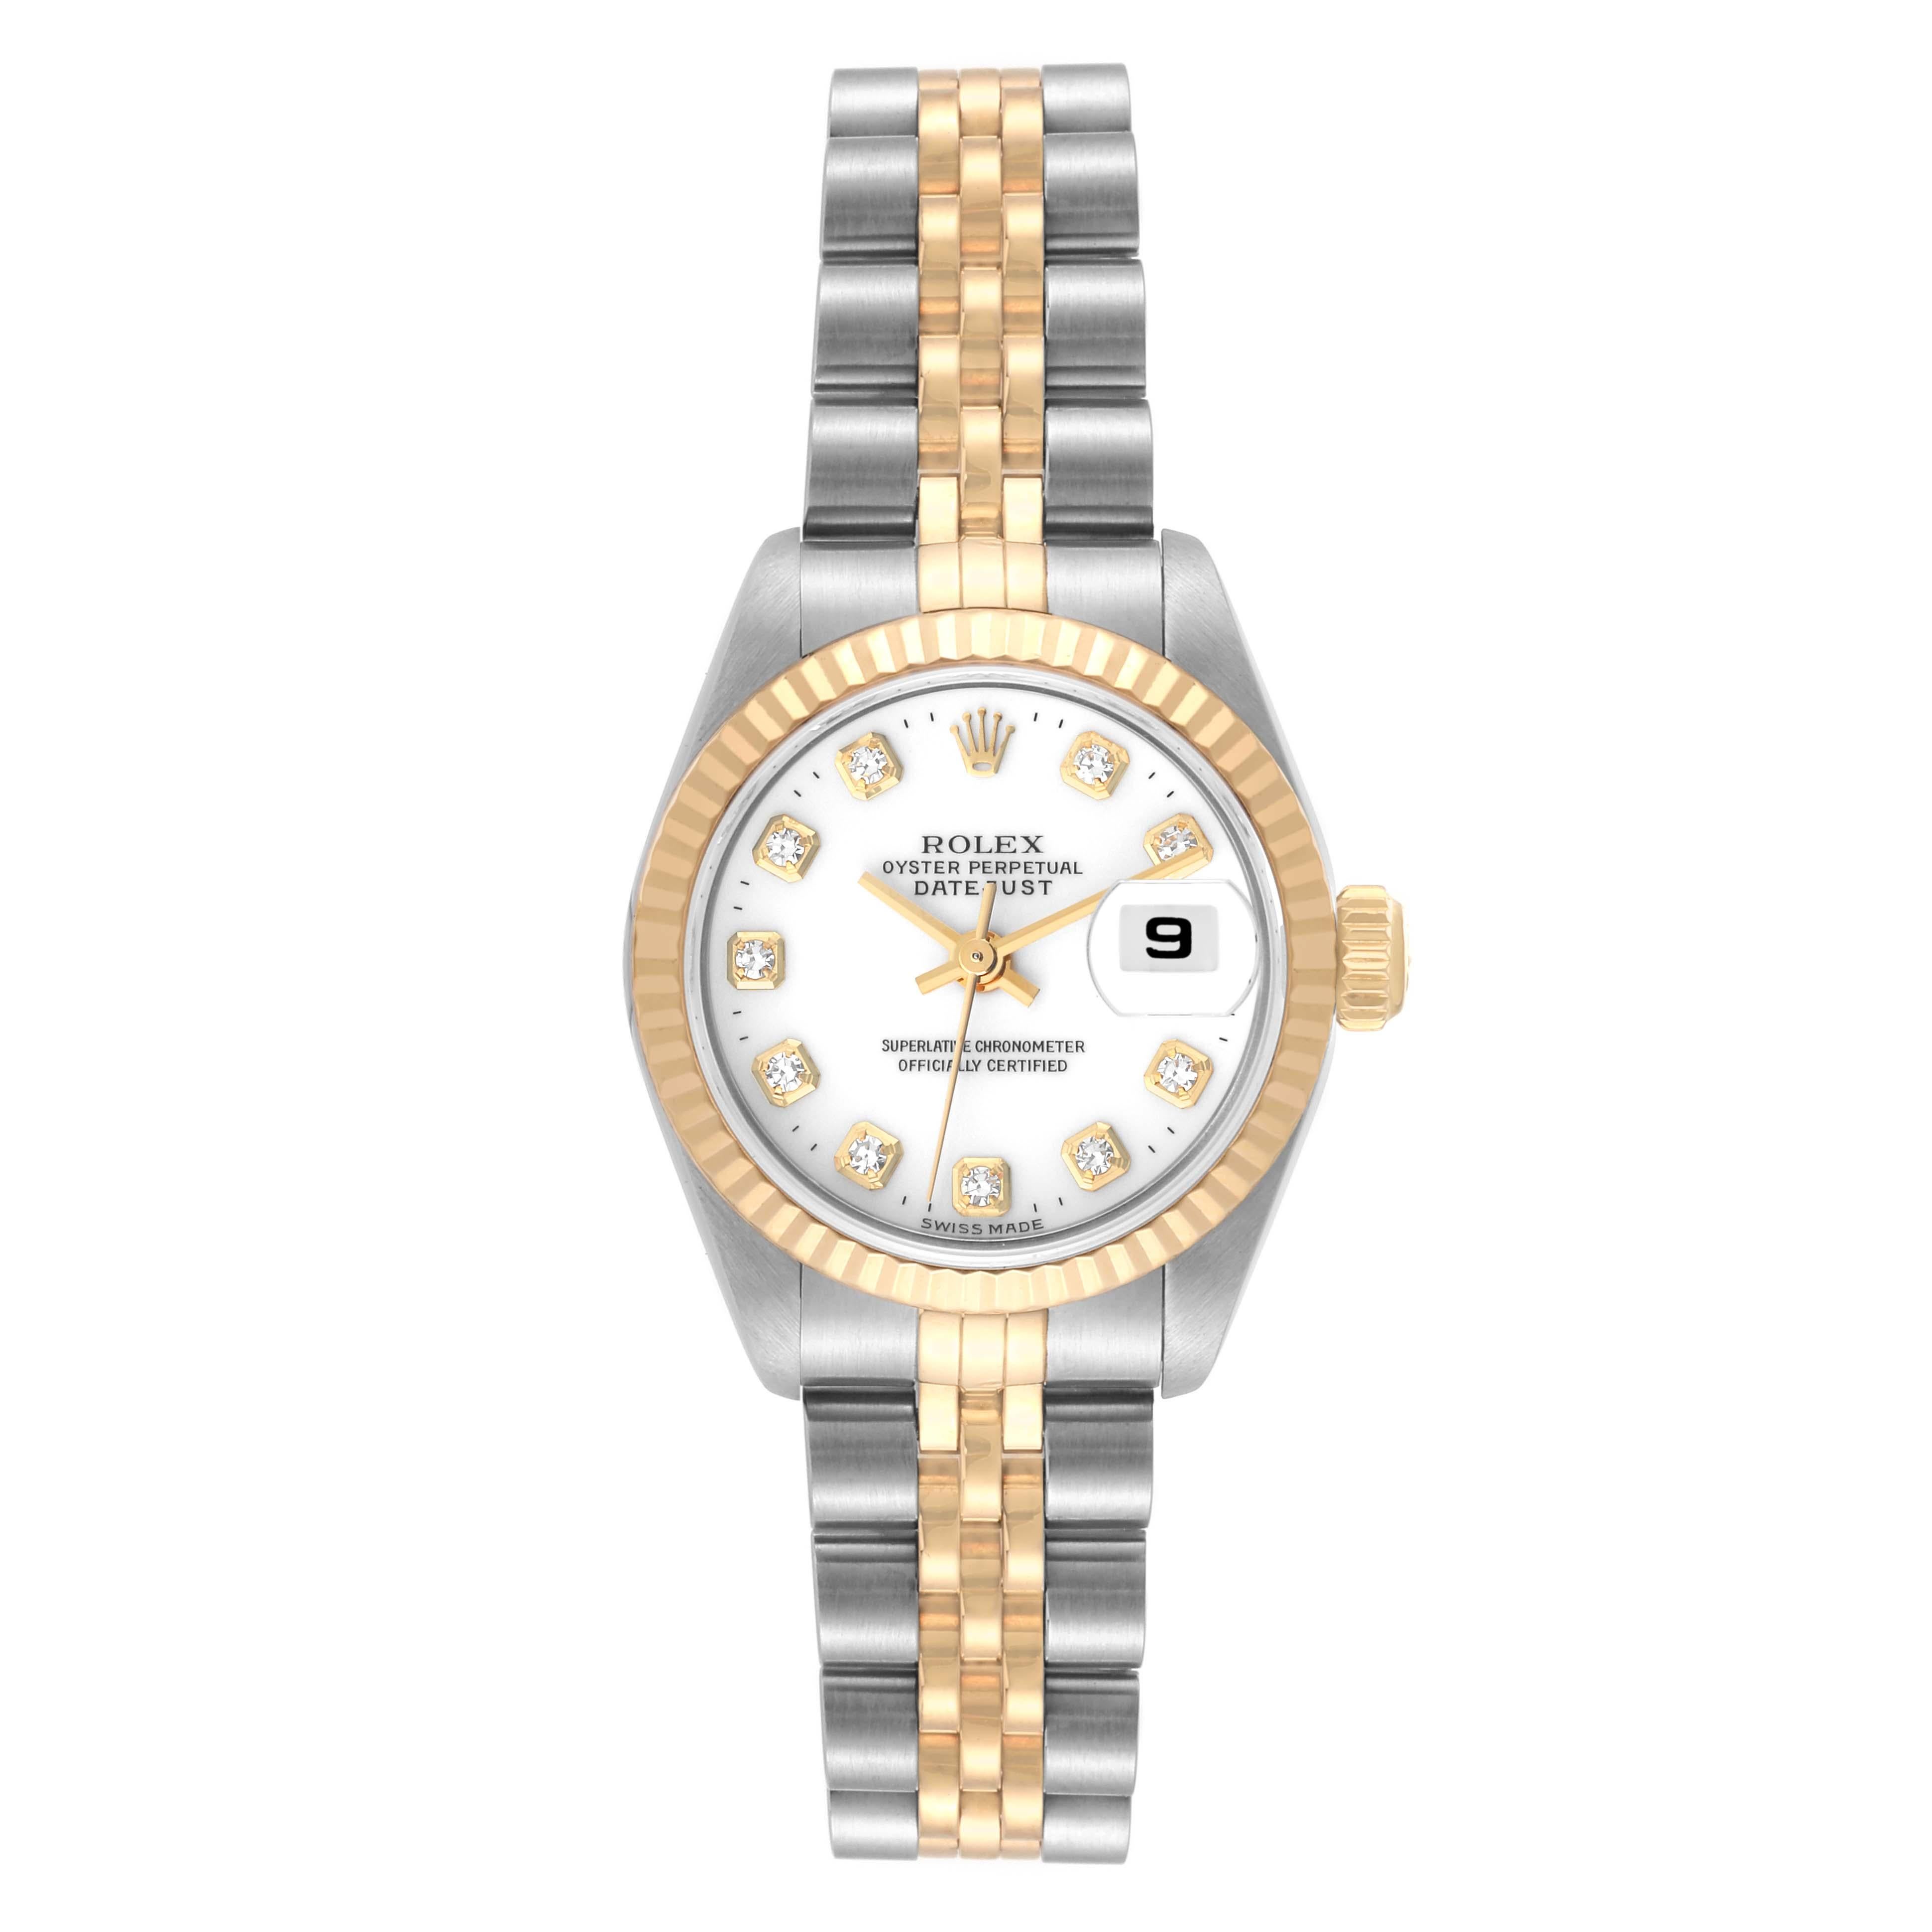 Rolex Datejust Steel Yellow Gold White Diamond Dial Ladies Watch 79173. Officially certified chronometer automatic self-winding movement. Stainless steel oyster case 26.0 mm in diameter. Rolex logo on an 18K yellow gold crown. 18k yellow gold fluted